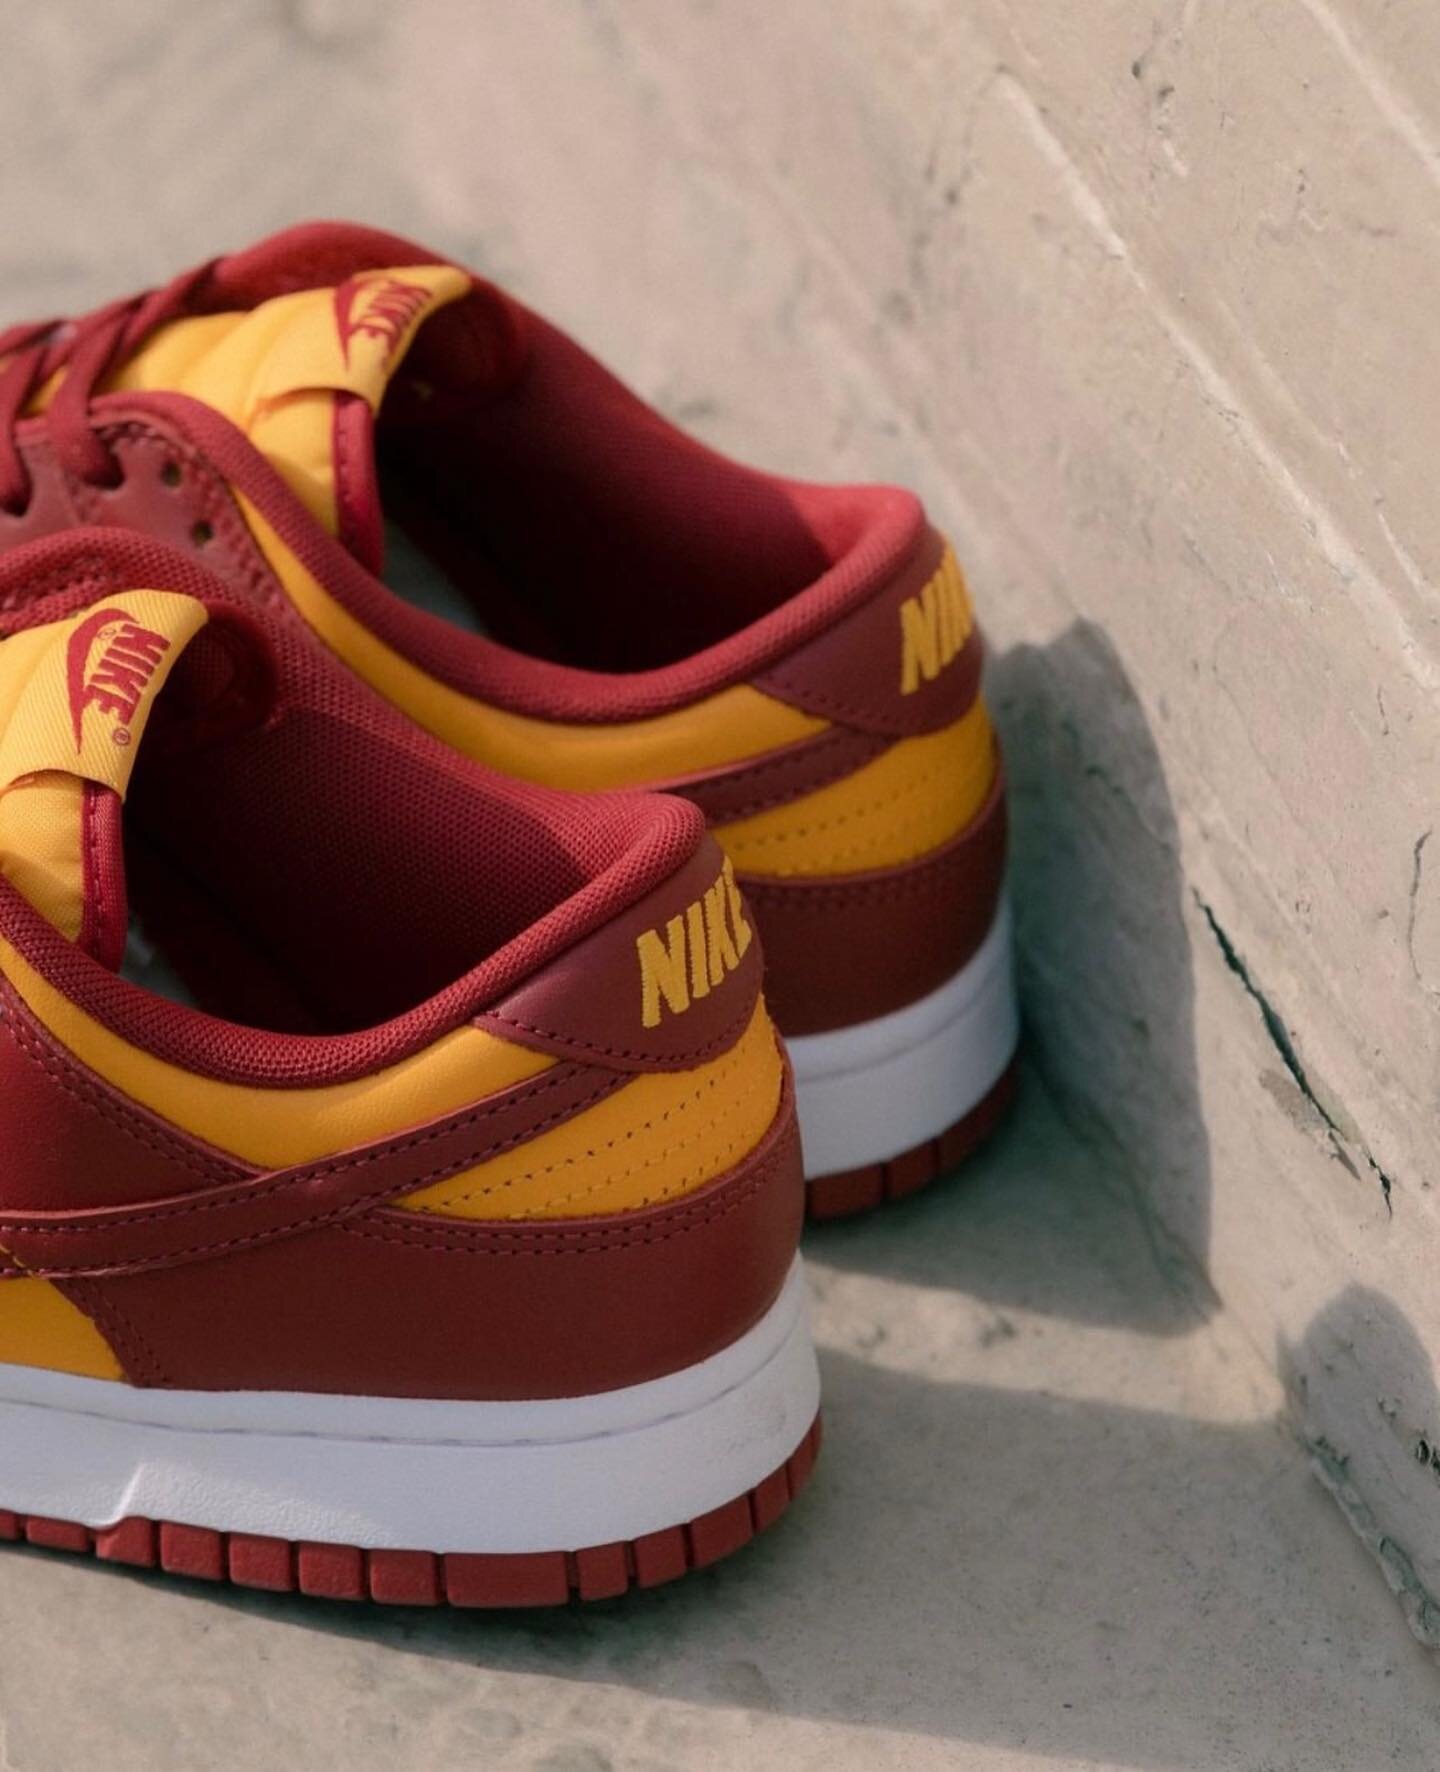 With #marchmadness around the corner, Nike give the Dunk Low Retro the USC treatment with the its latest &ldquo;Midas Gold&rdquo; edit. Raffles are live at select stores nationwide with a retail price of $100.
📸: @packer 

⁣
.⁣
.⁣
.⁣
.⁣
.⁣
#sneakerp